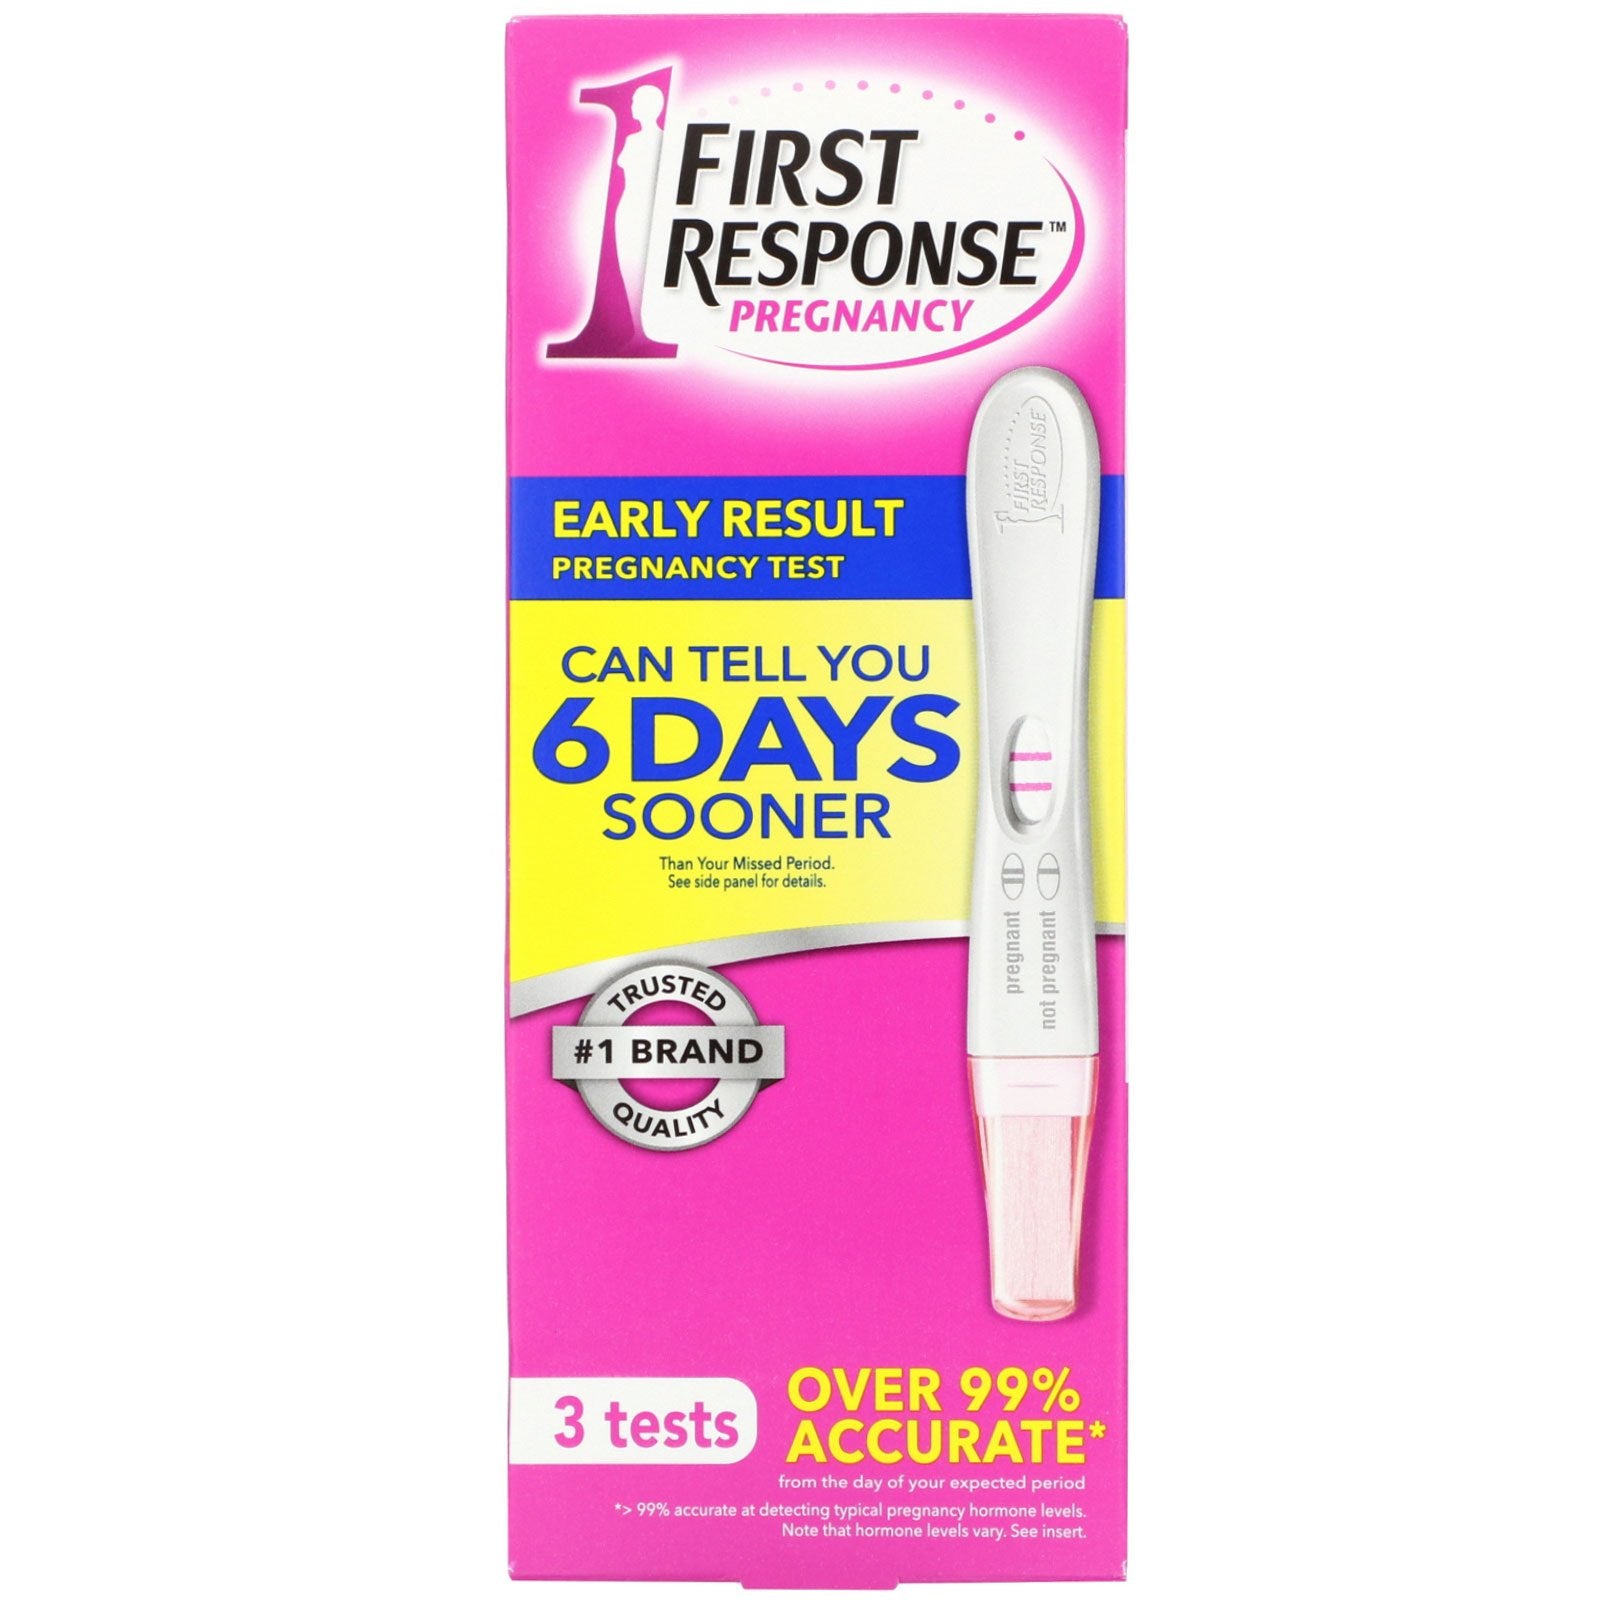 First Response, Early Result Pregnancy Test, 3 Tests